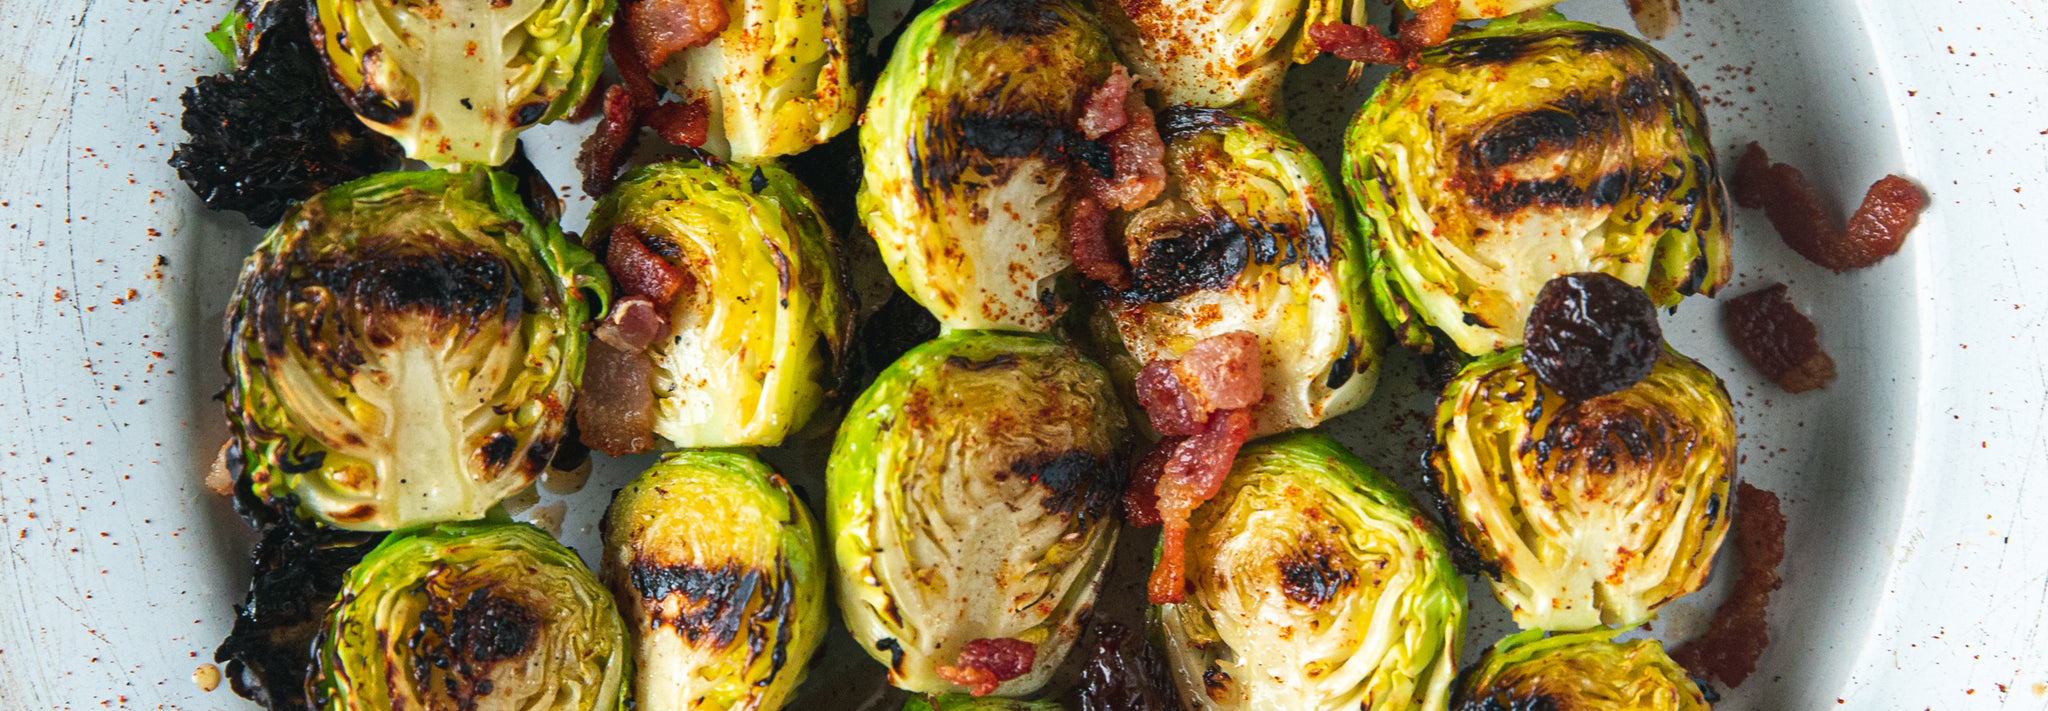 Brussel Sprout Skewers - Gozney . Roccbox